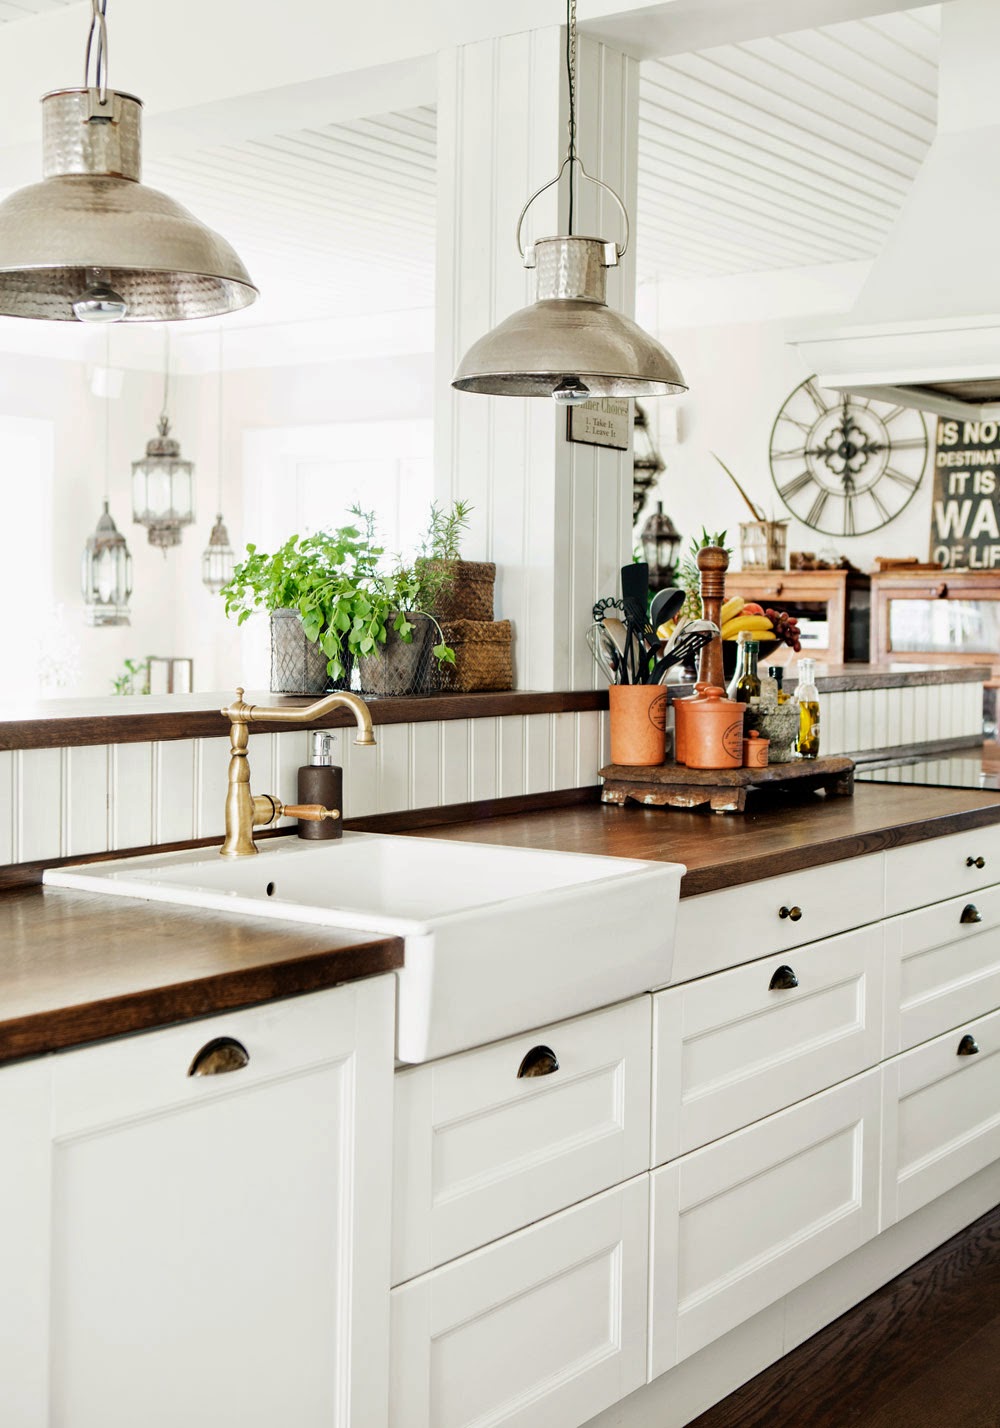 Classic farm style kitchen with butcher block wood counters in a Swedish home